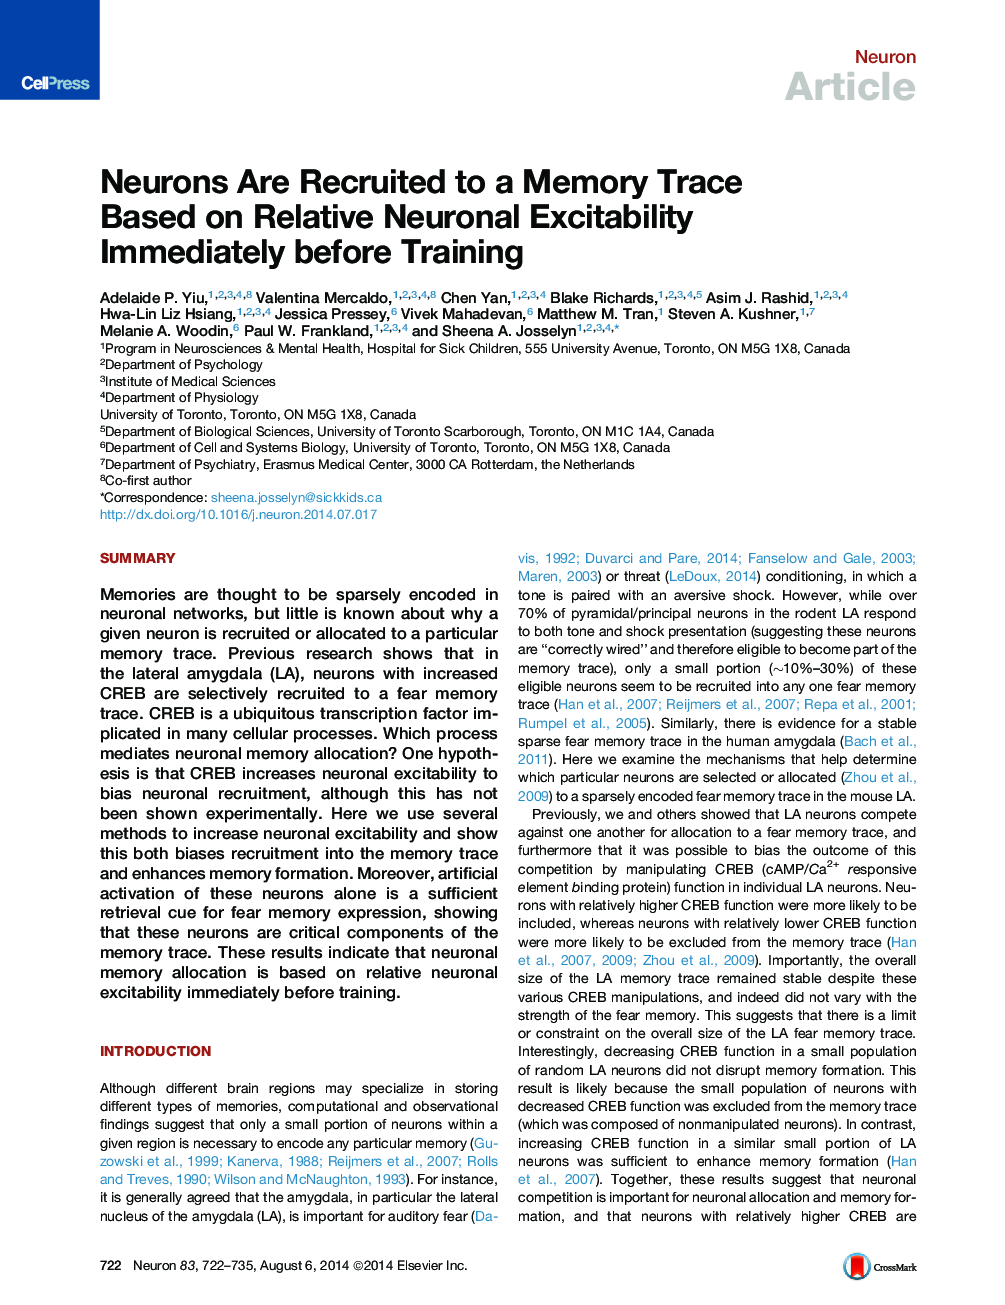 Neurons Are Recruited to a Memory Trace Based on Relative Neuronal Excitability Immediately before Training